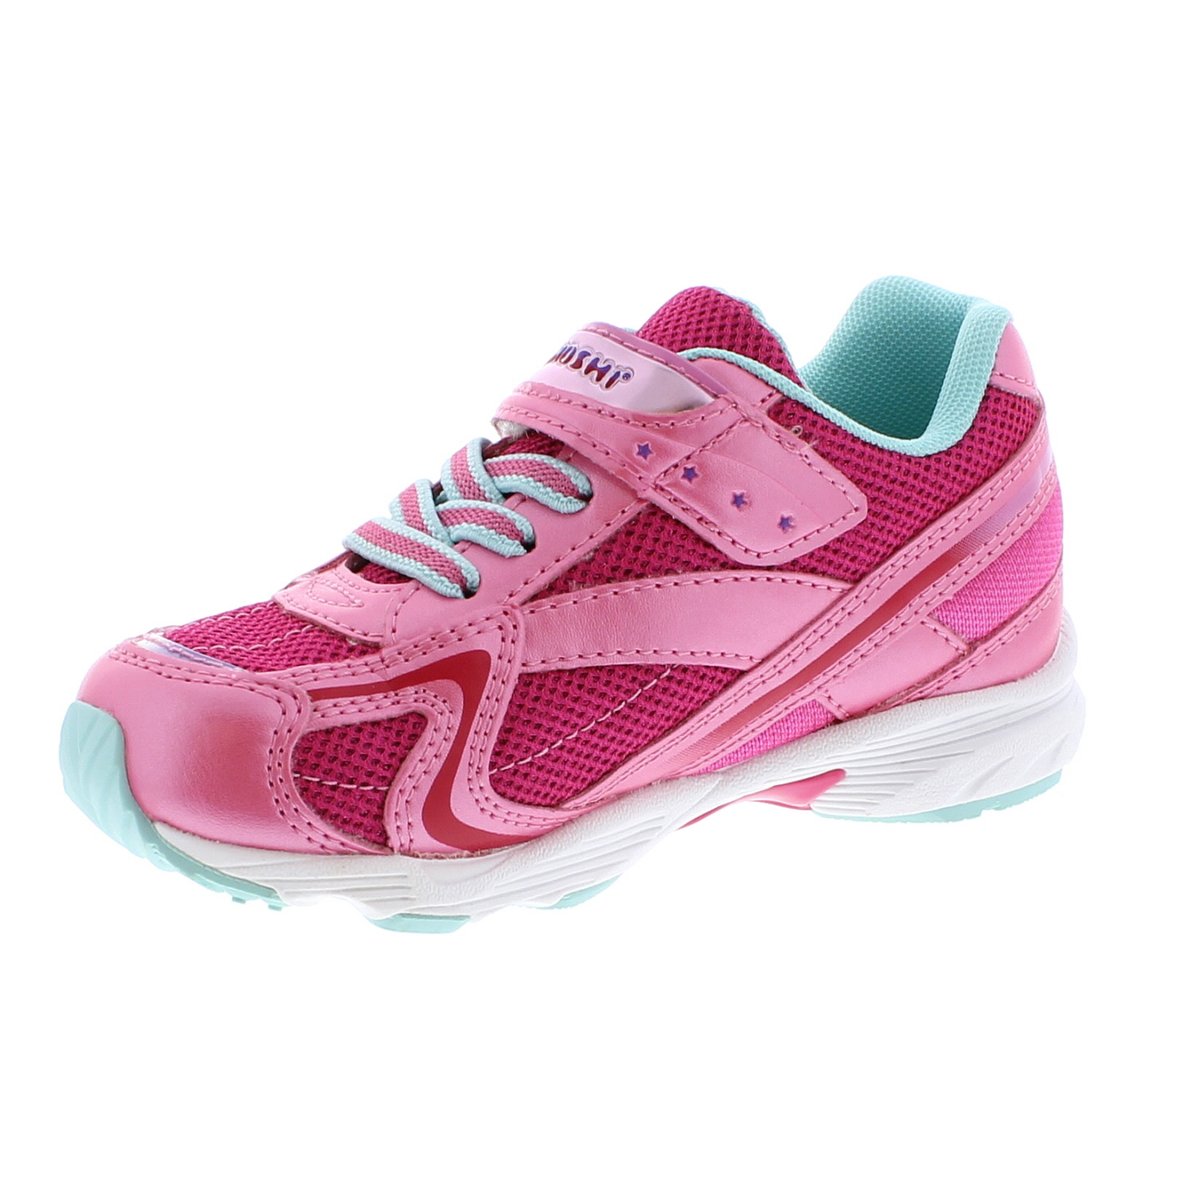 Child Tsukihoshi Glitz Sneaker in Hot Pink/Mint from the front view